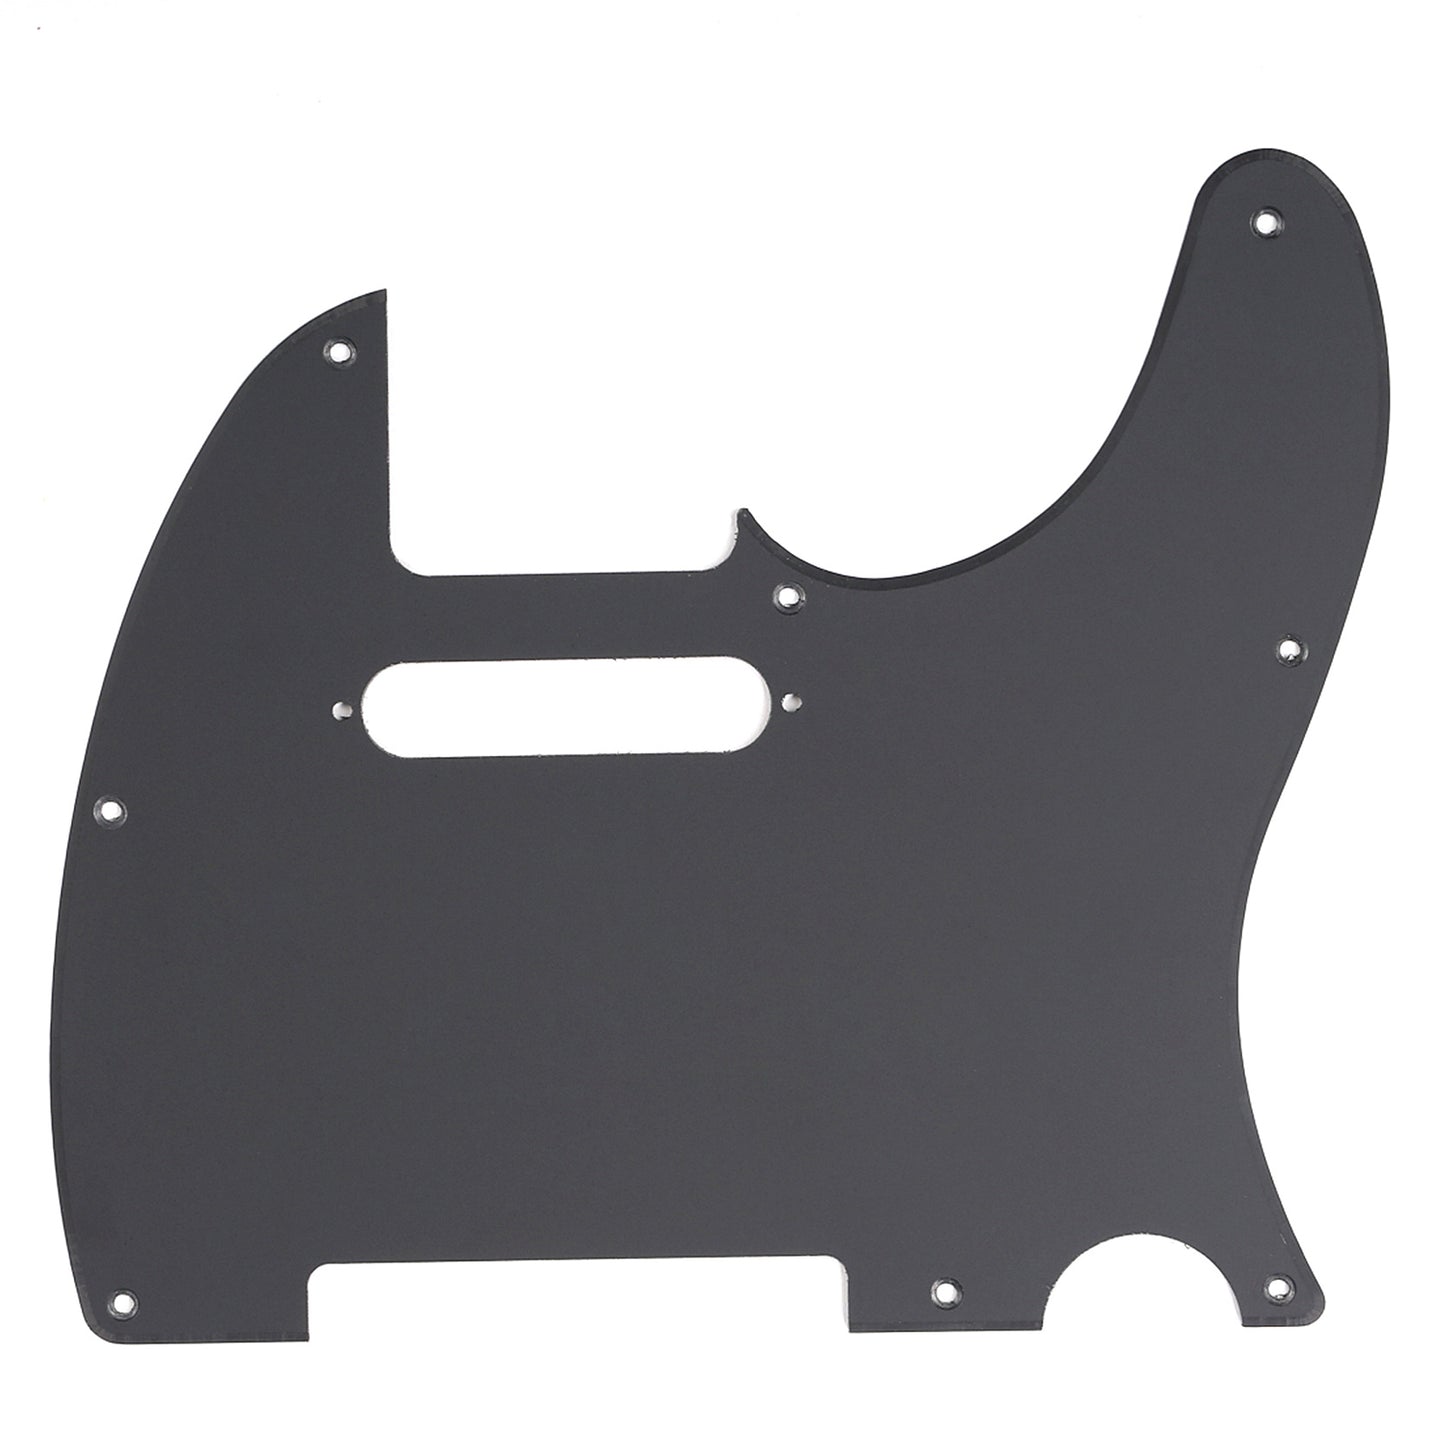 Musiclily 8 Hole Tele Guitar Pickguard for USA/Mexican Made Fender Standard Telecaster Modern Style, 1Ply Matte Black